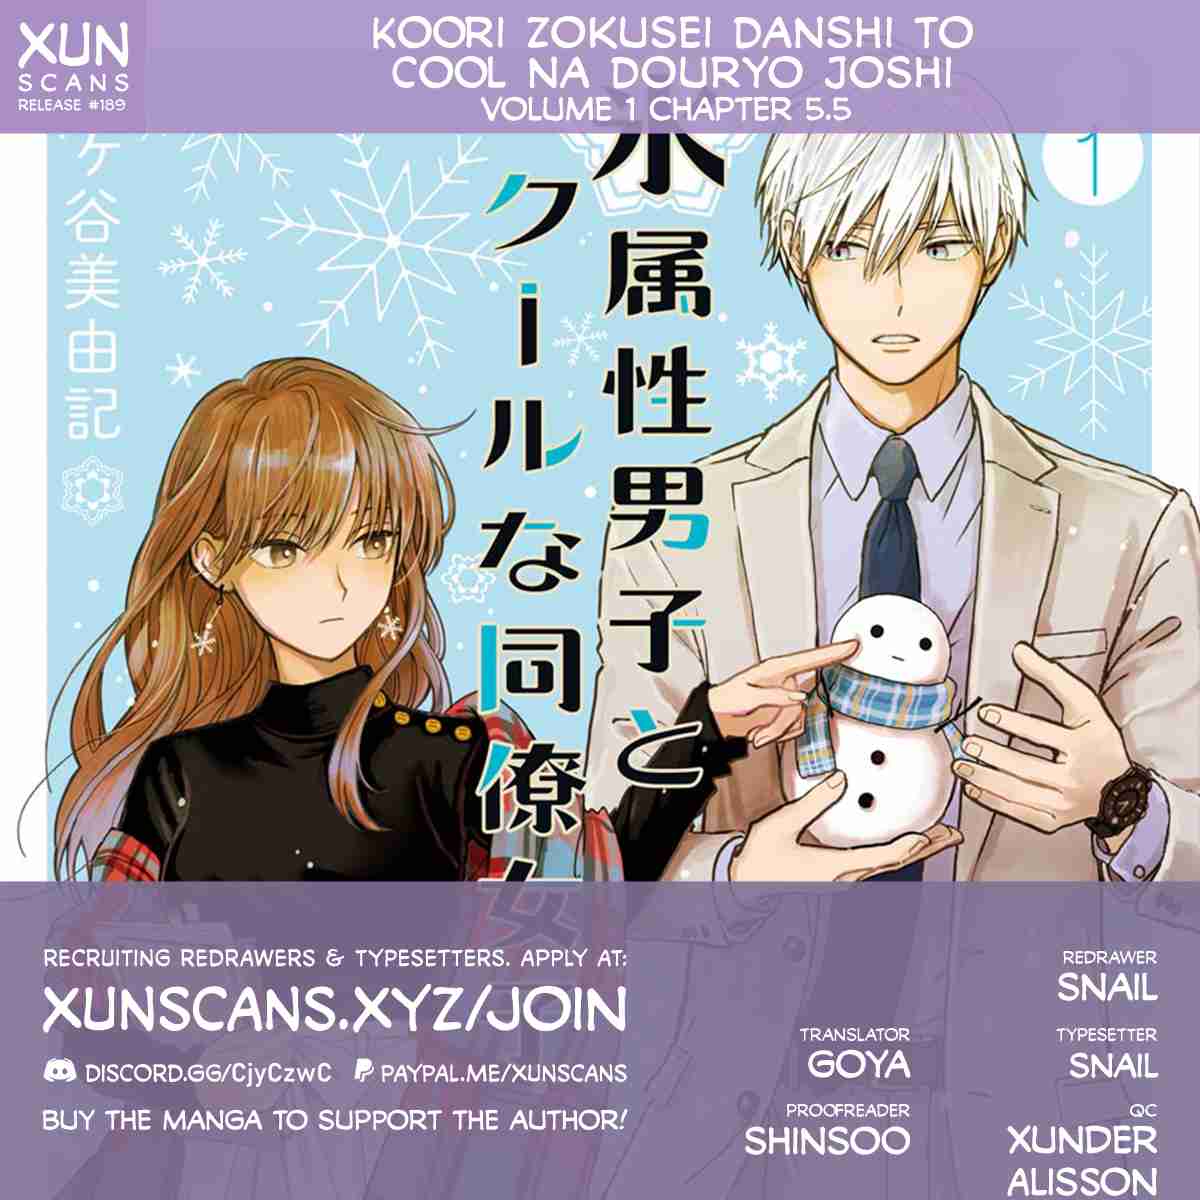 Ice Guy and the Cool Female Colleague Vol. 1 Ch. 5.5 The Story about the Okinawa Business Trip